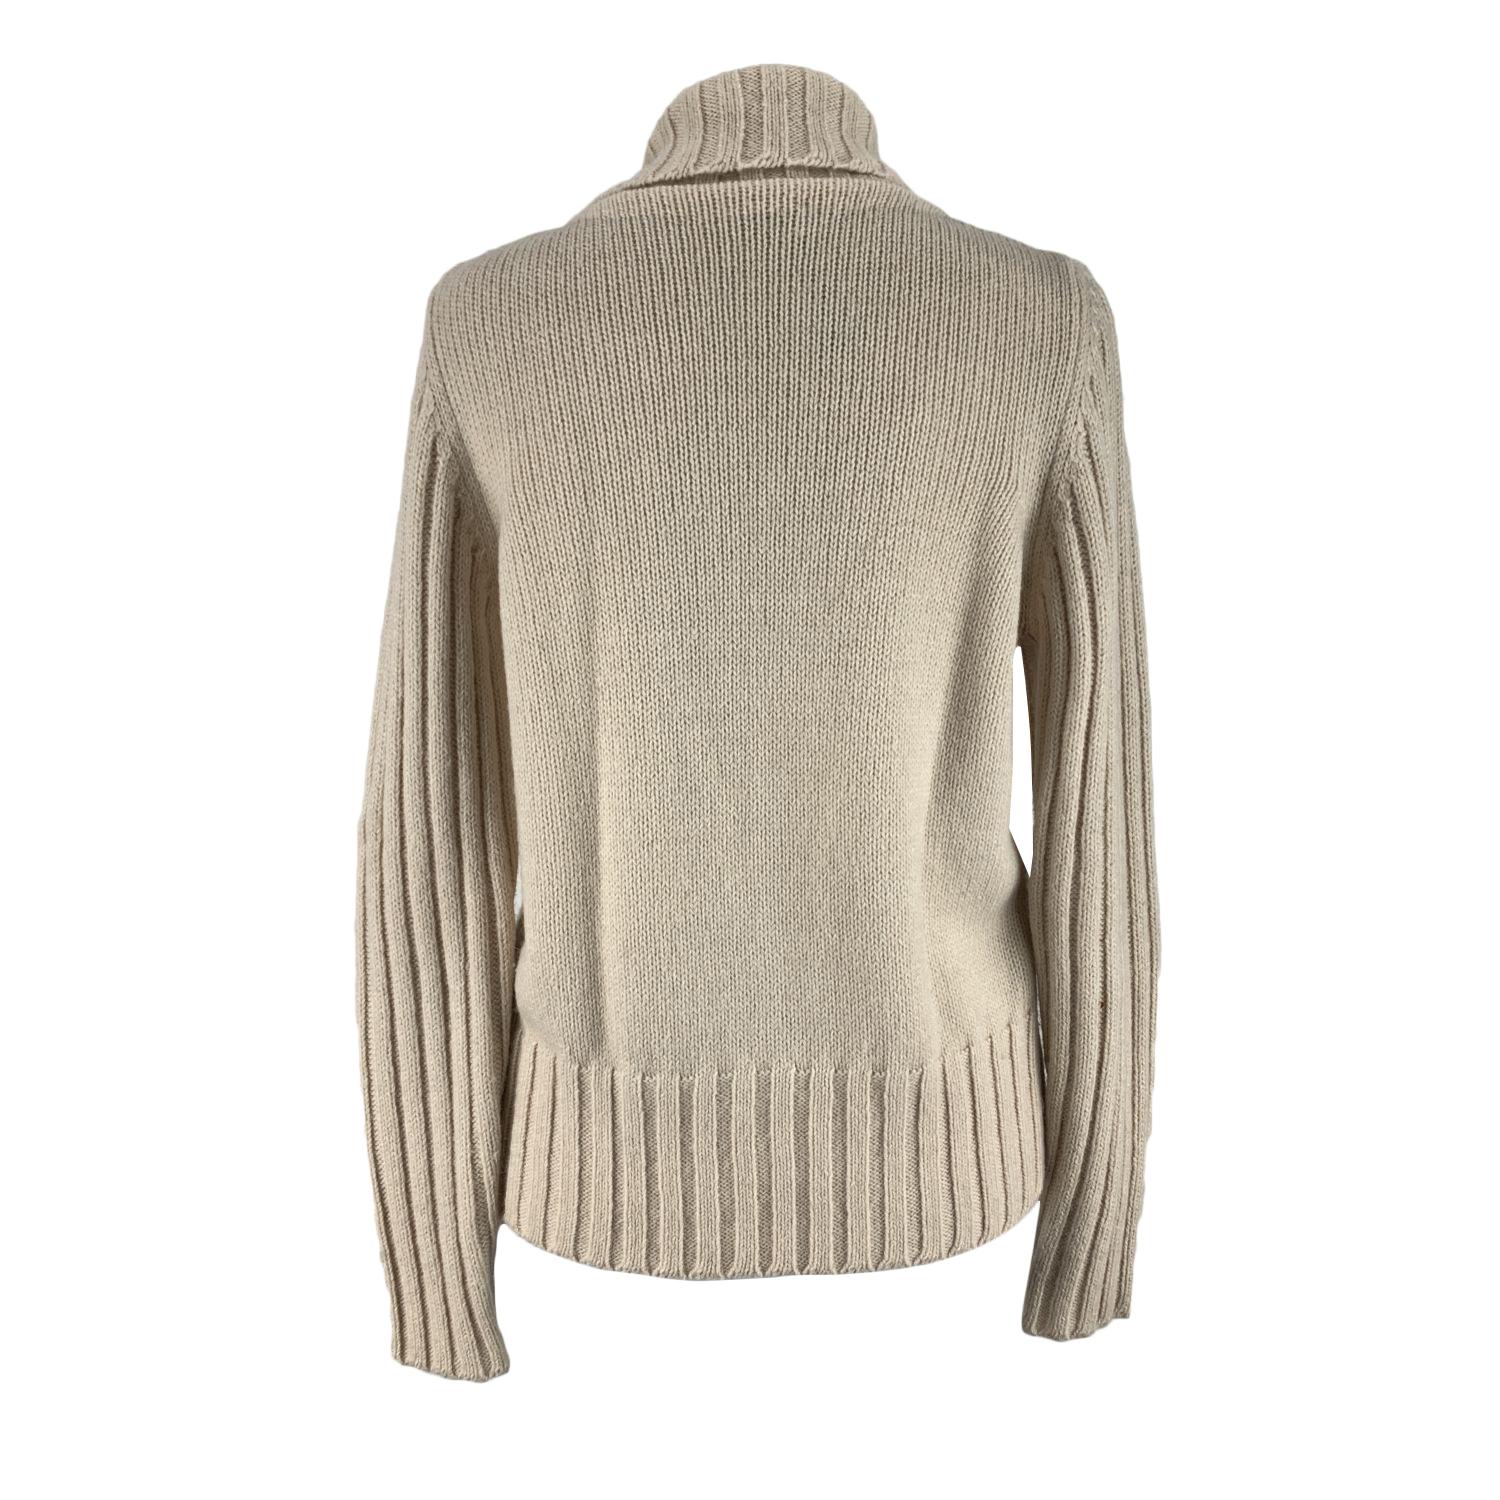 Blumarine Blugirl beige cardigan with floral applique with sequin on the shoulder. It features ribbed collar, sleeves and hem. Hook and eye closure on the front.Composition: 42% wool, 30% acrylic, 28% alpaca. Size: 46 IT, 40 D (The size shown for